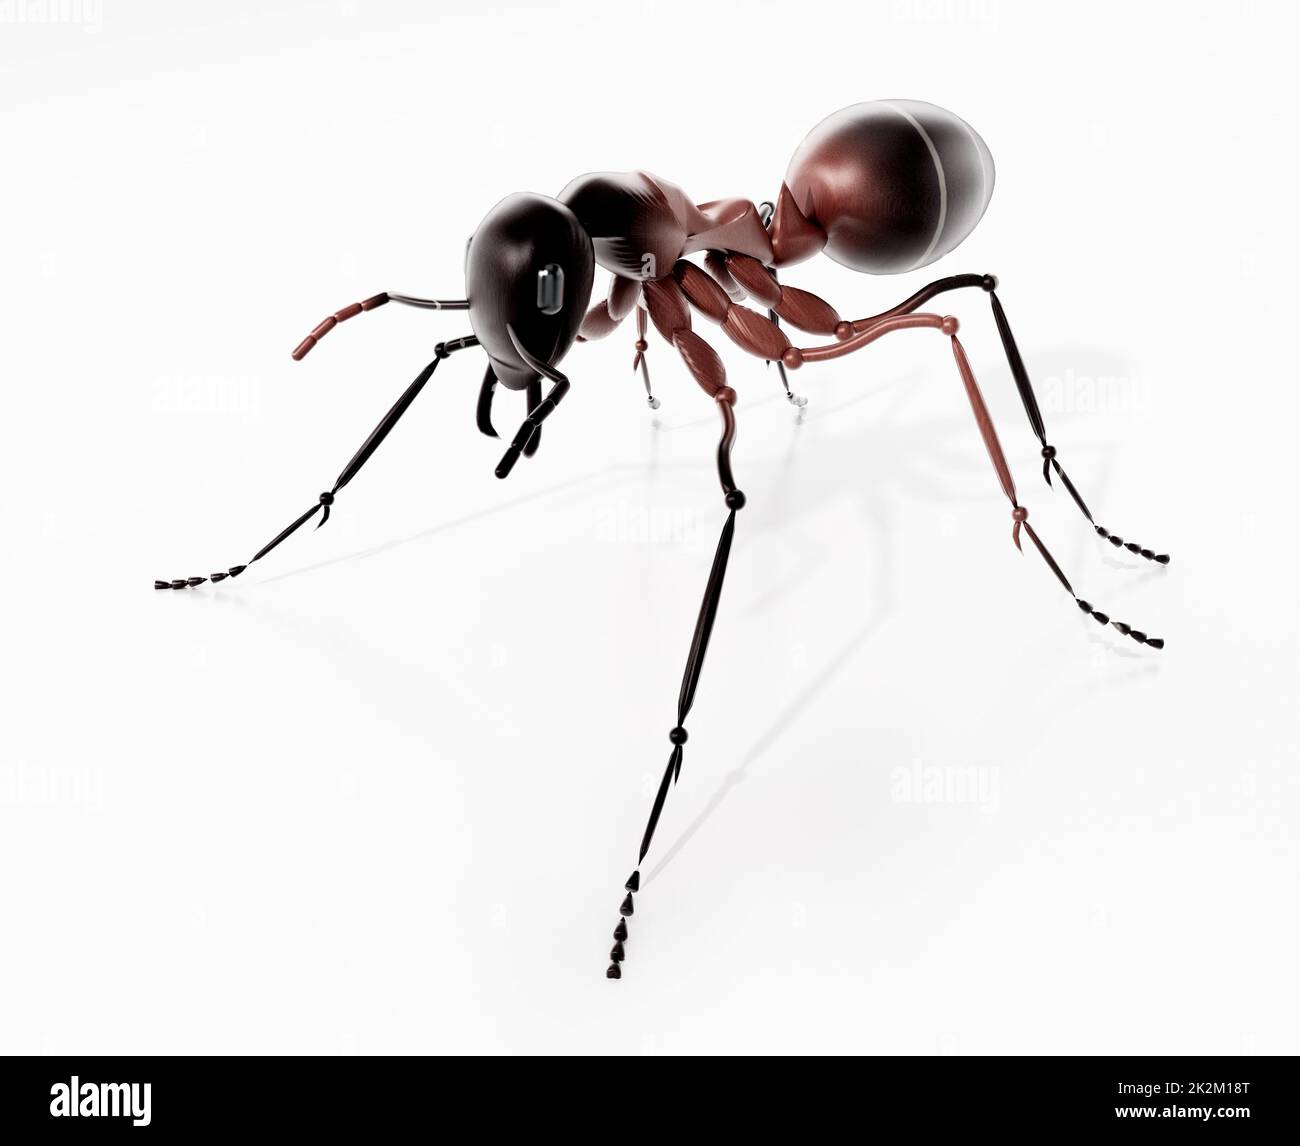 3D illustration of an ant isolated on white background. 3D illustration Stock Photo